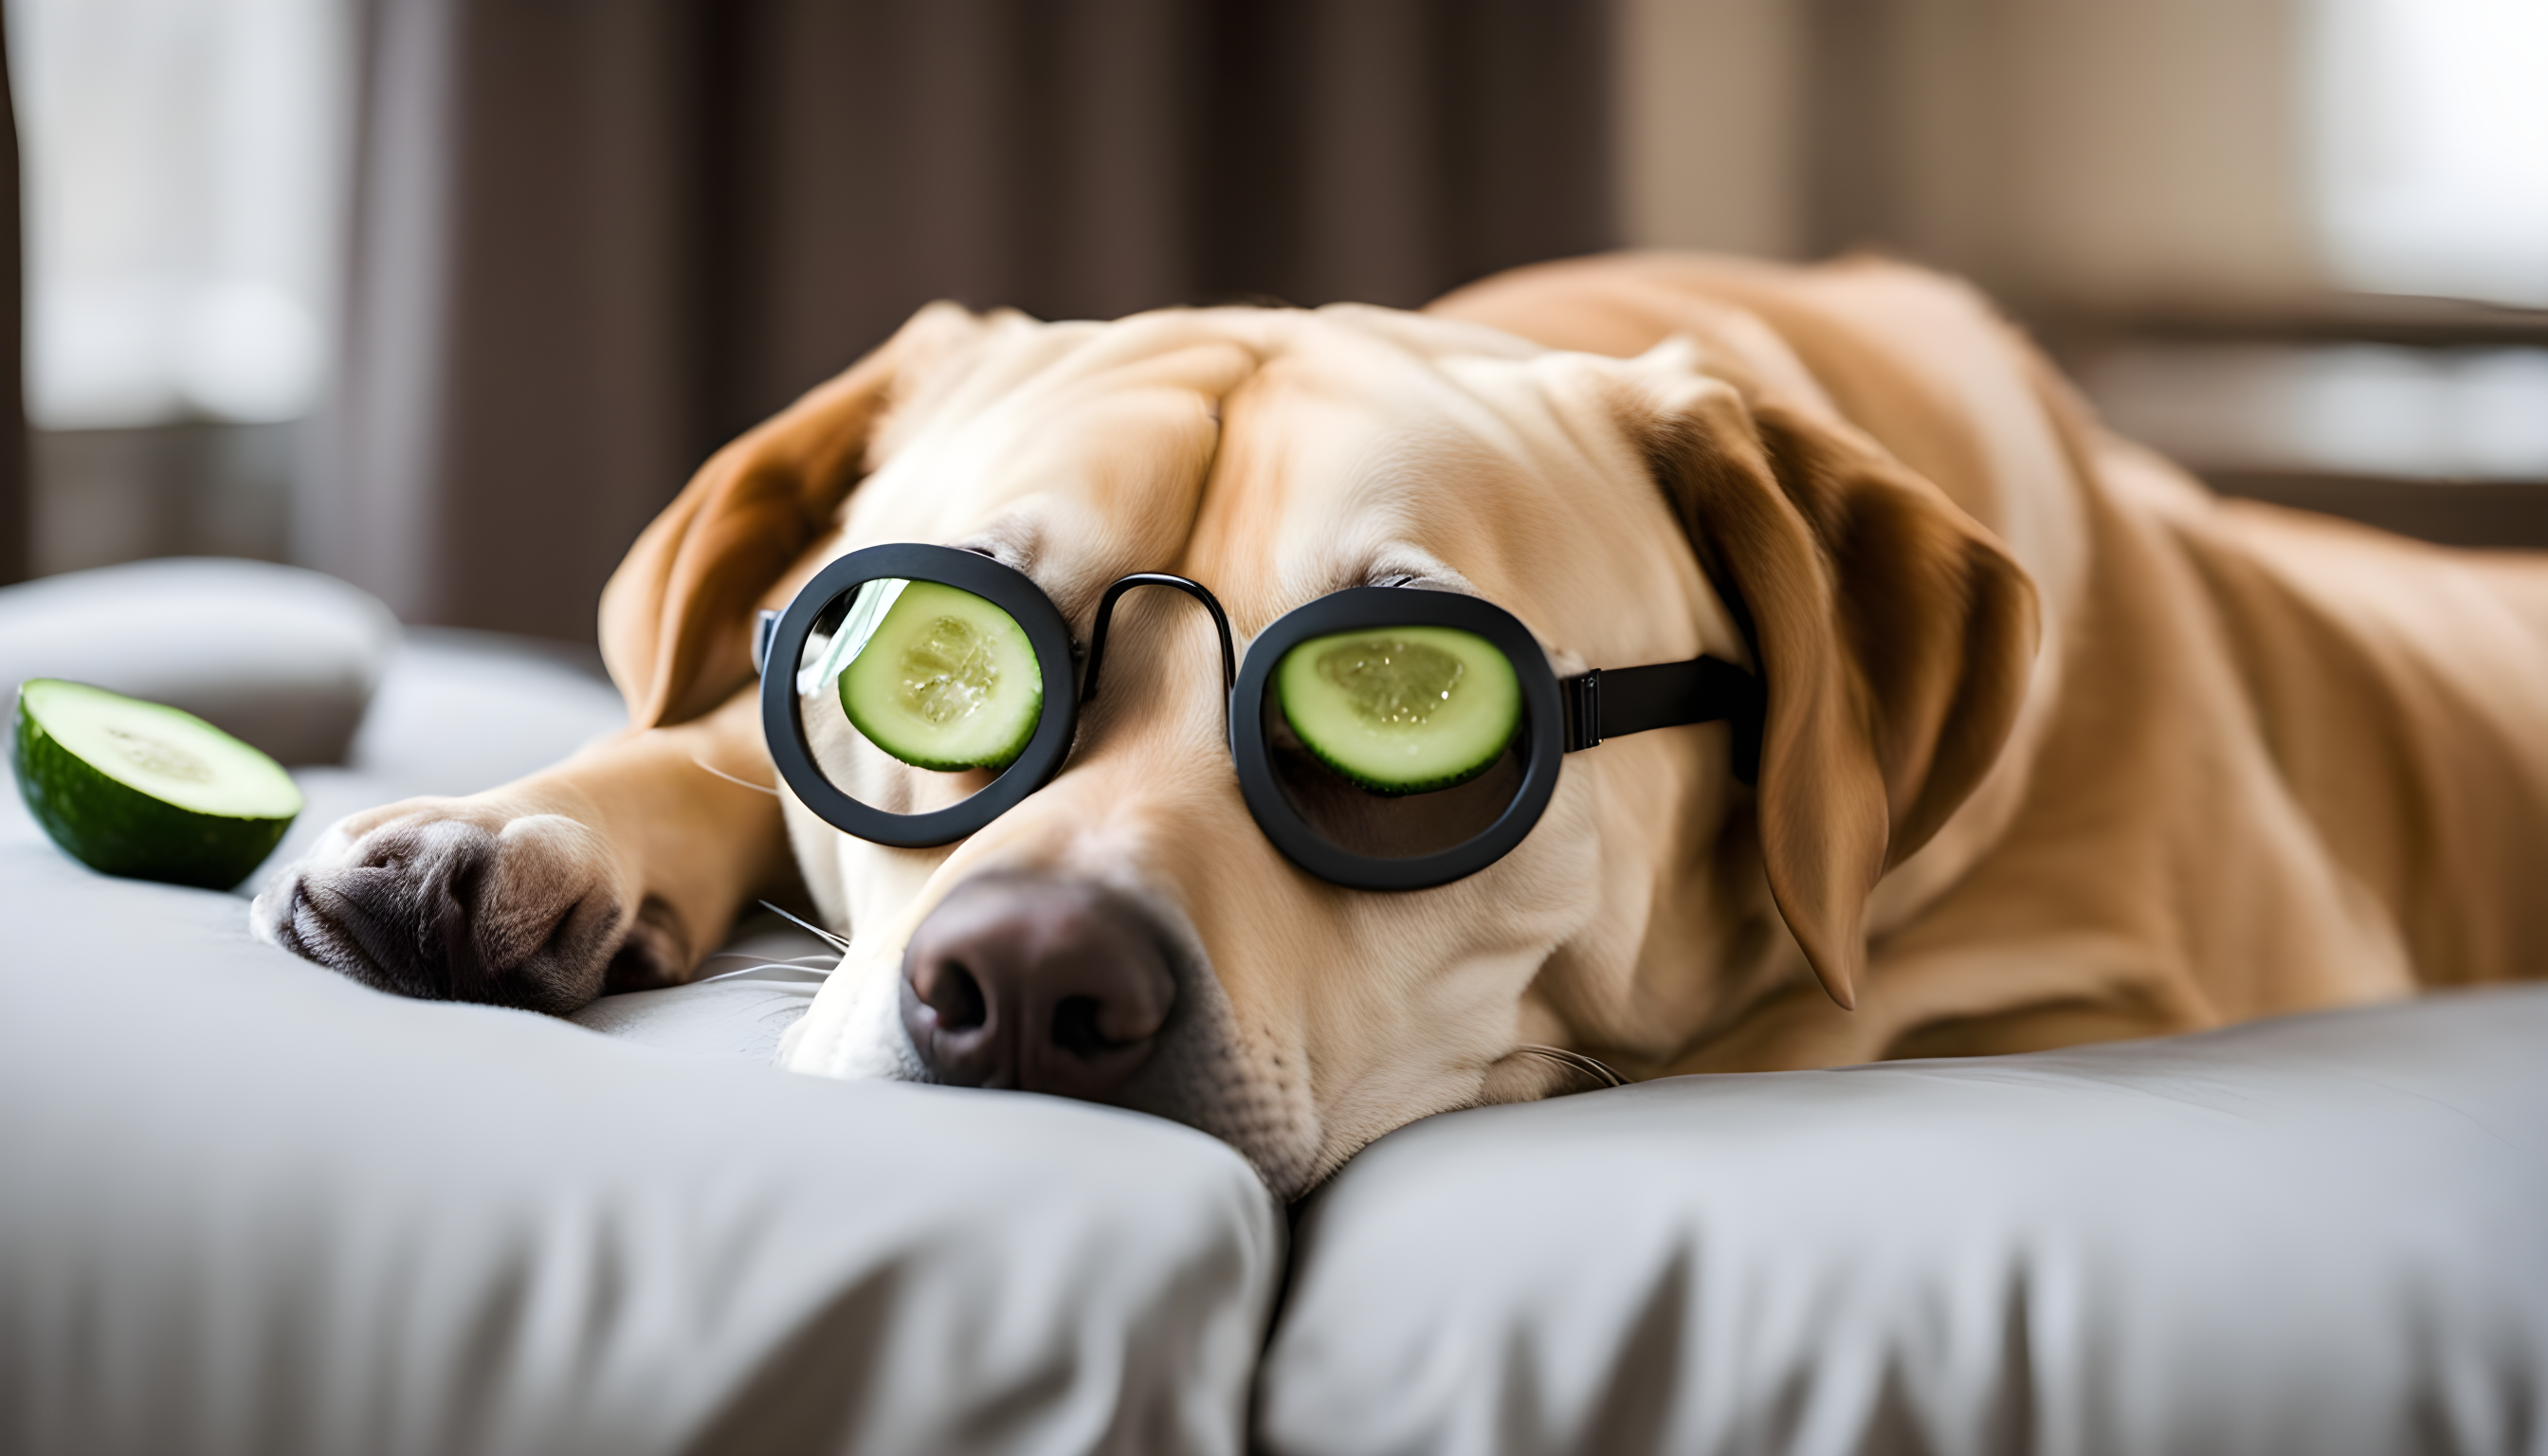 British Lab lounging with a face mask and cucumber slices on its eyes.